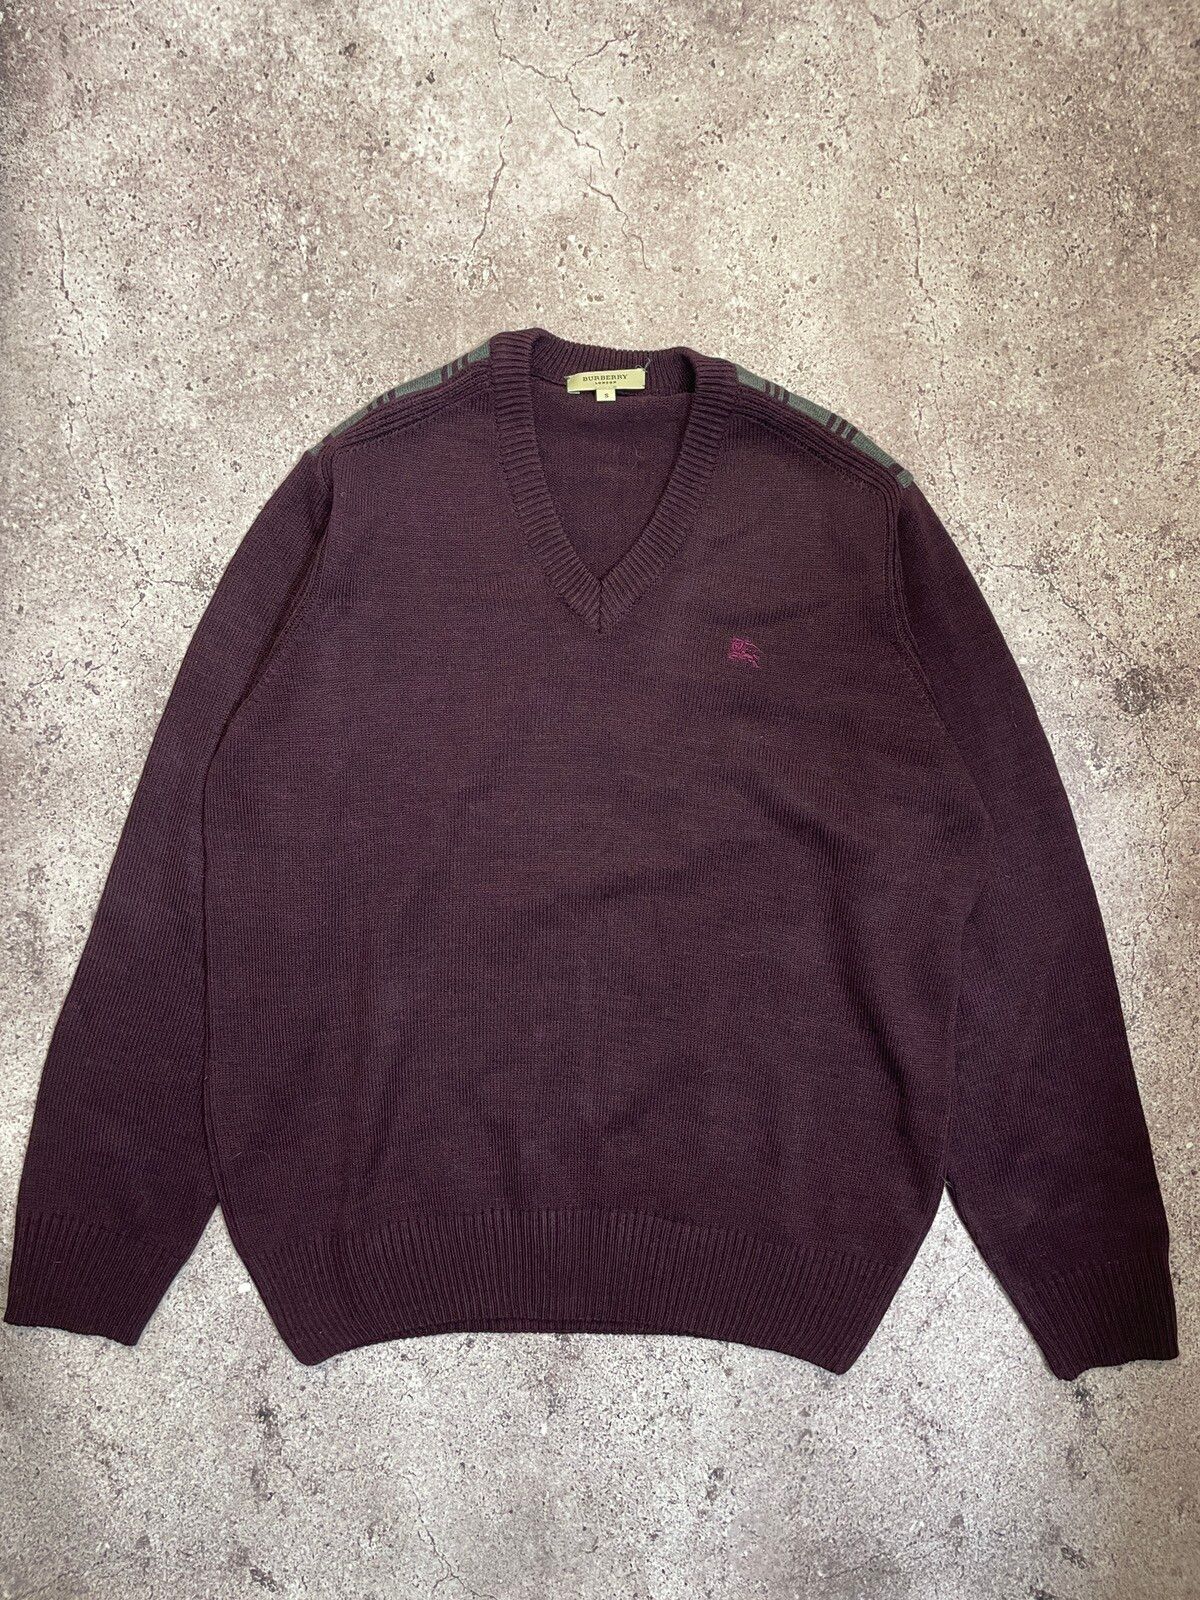 Pre-owned Burberry Vintage Sweater In Burgundy